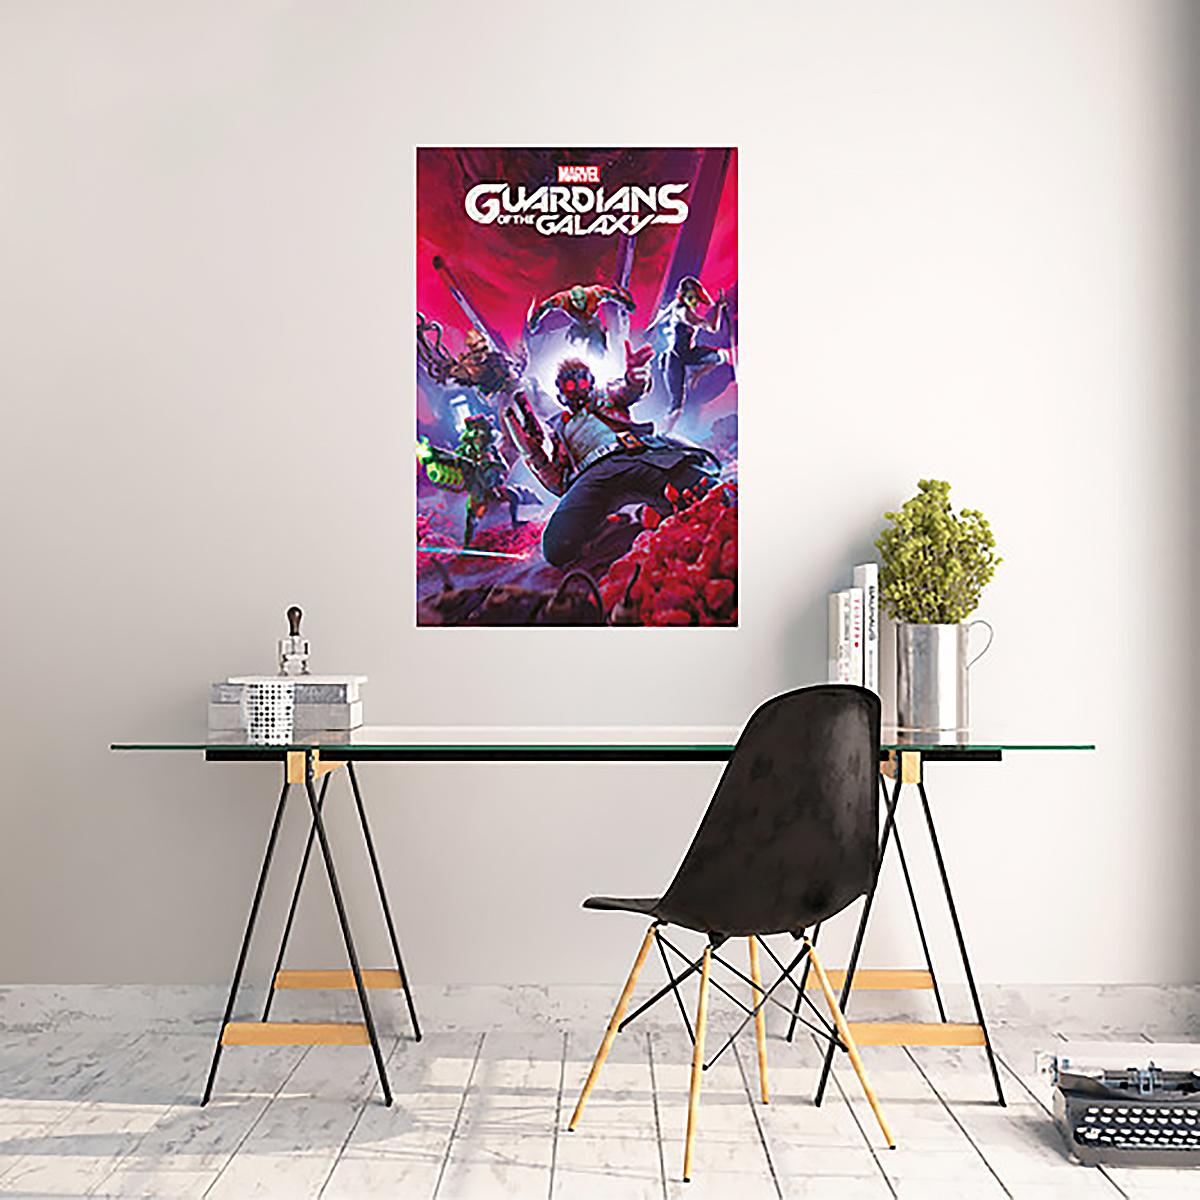 Cover EDITORES the Videospiel GRUPO Galaxy Poster Poster Guardians of ERIK